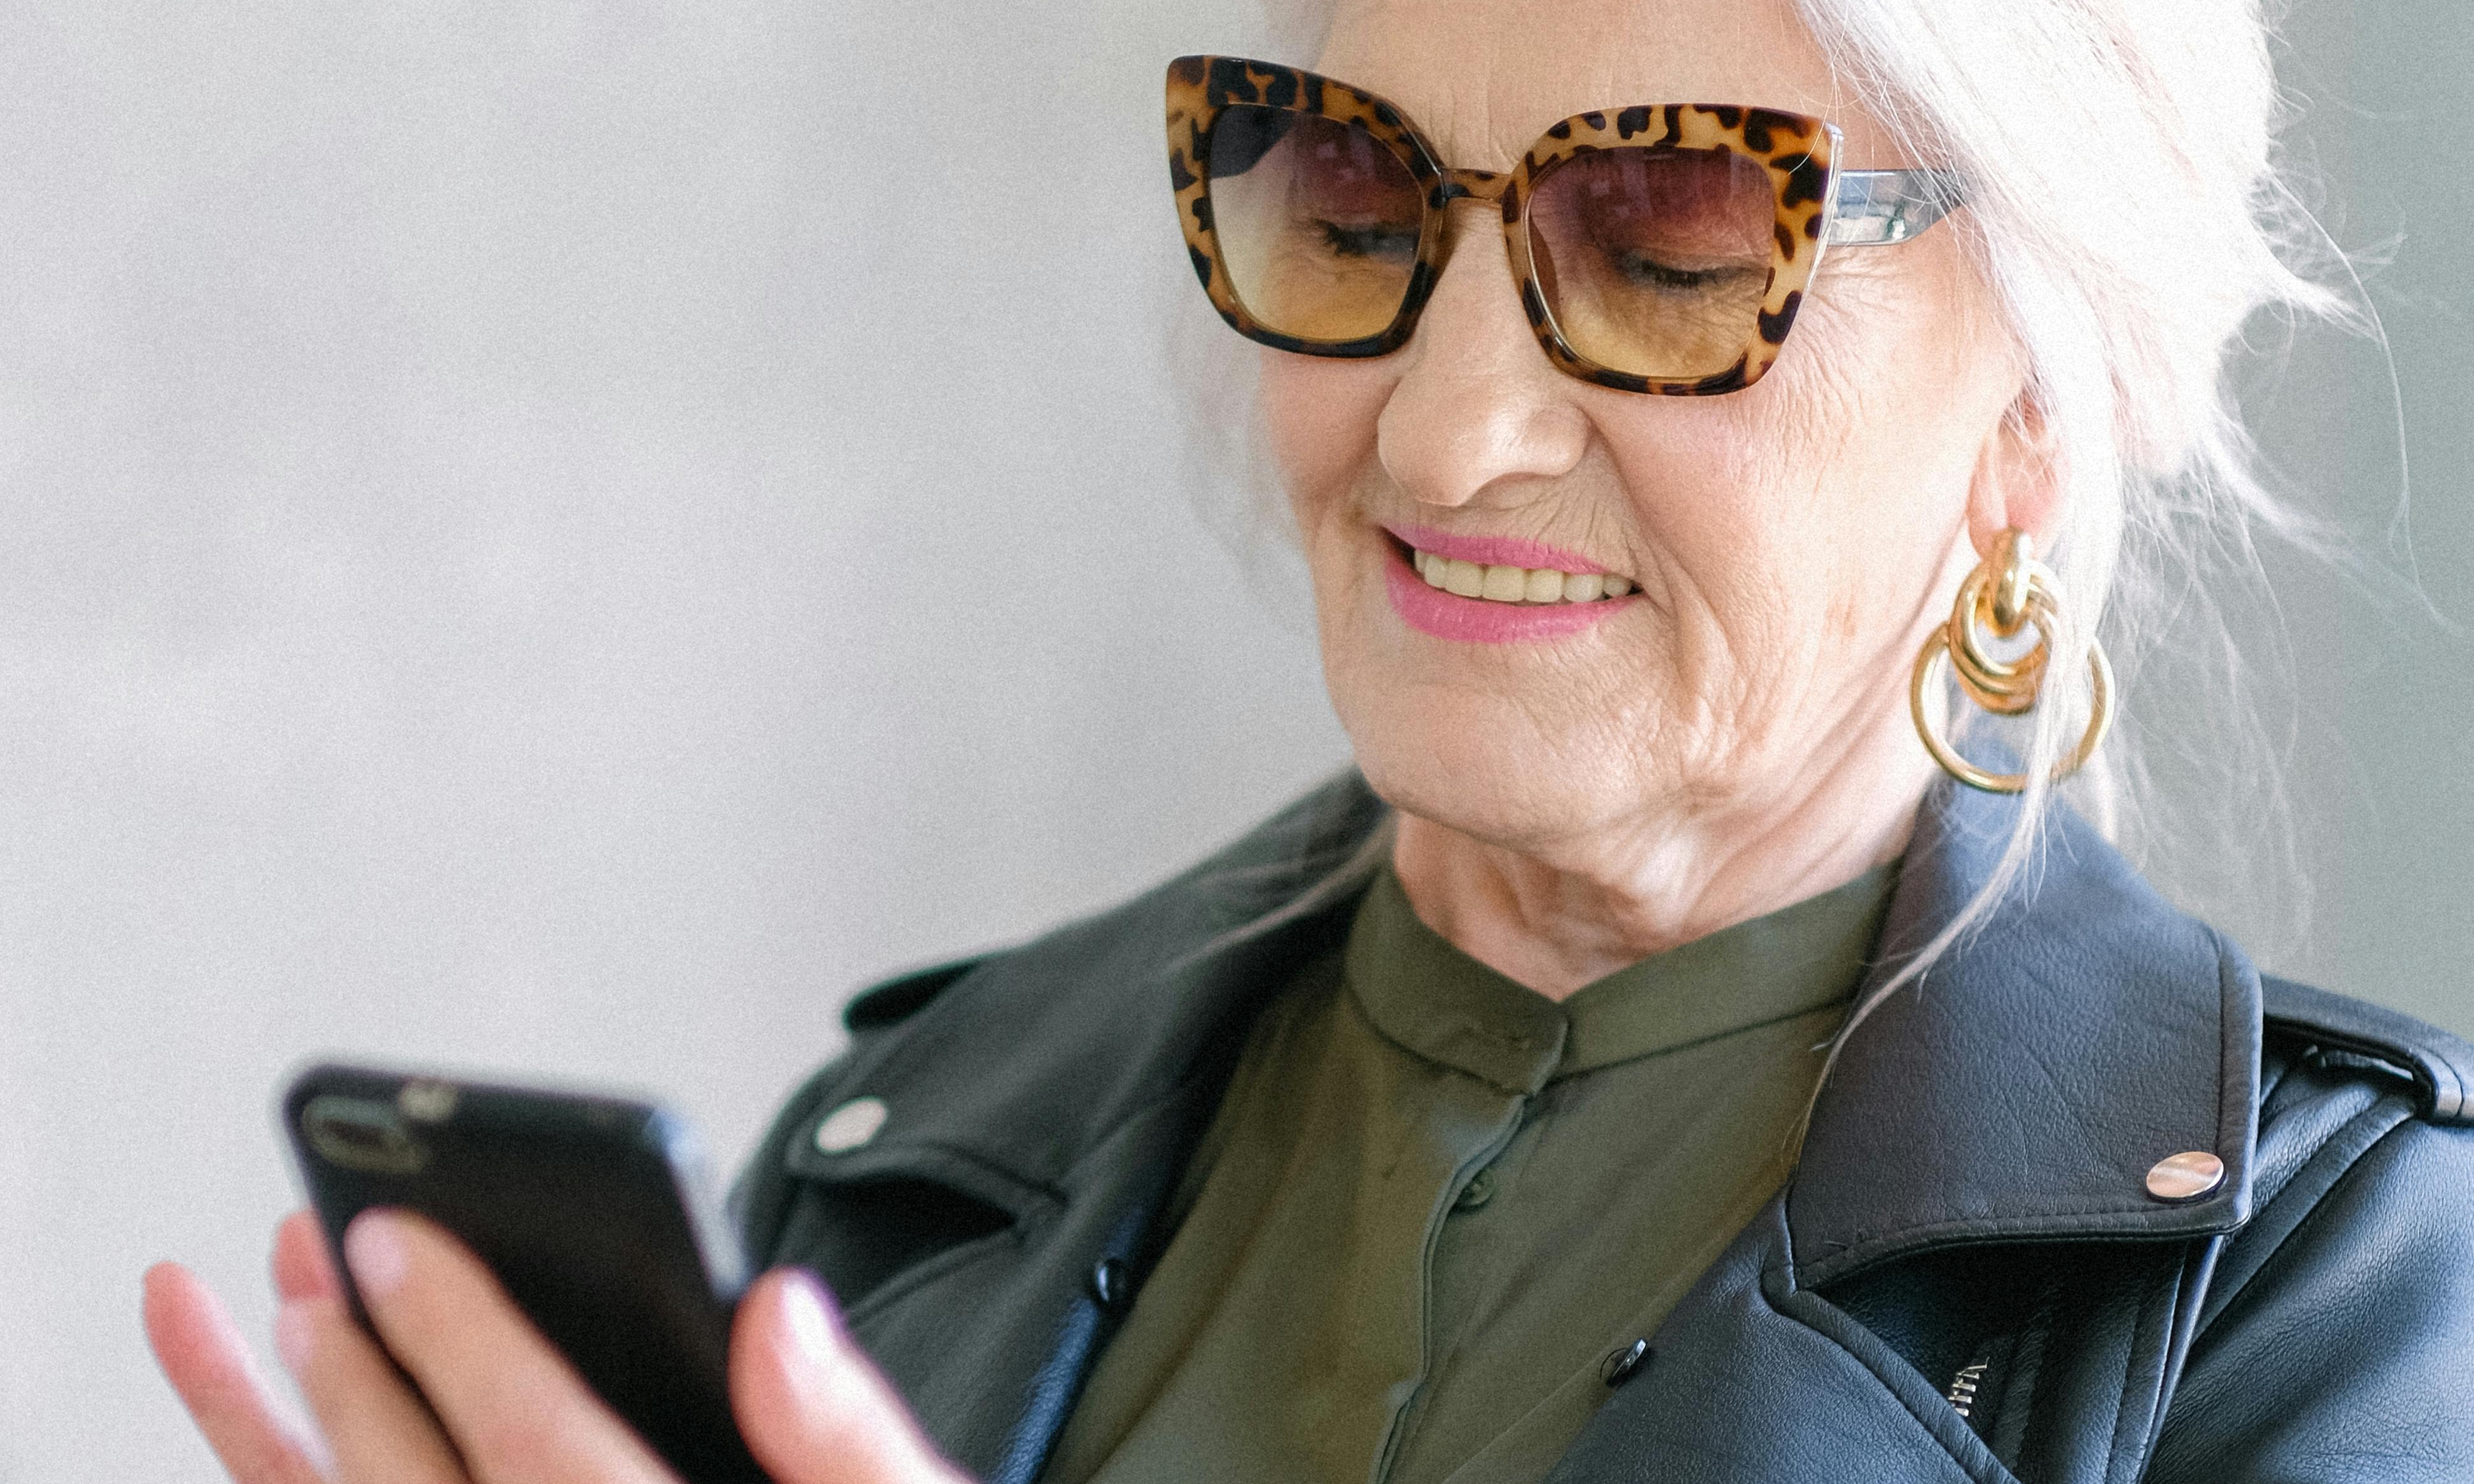 An elderly woman examines a cell phone screen | Source: Pexels